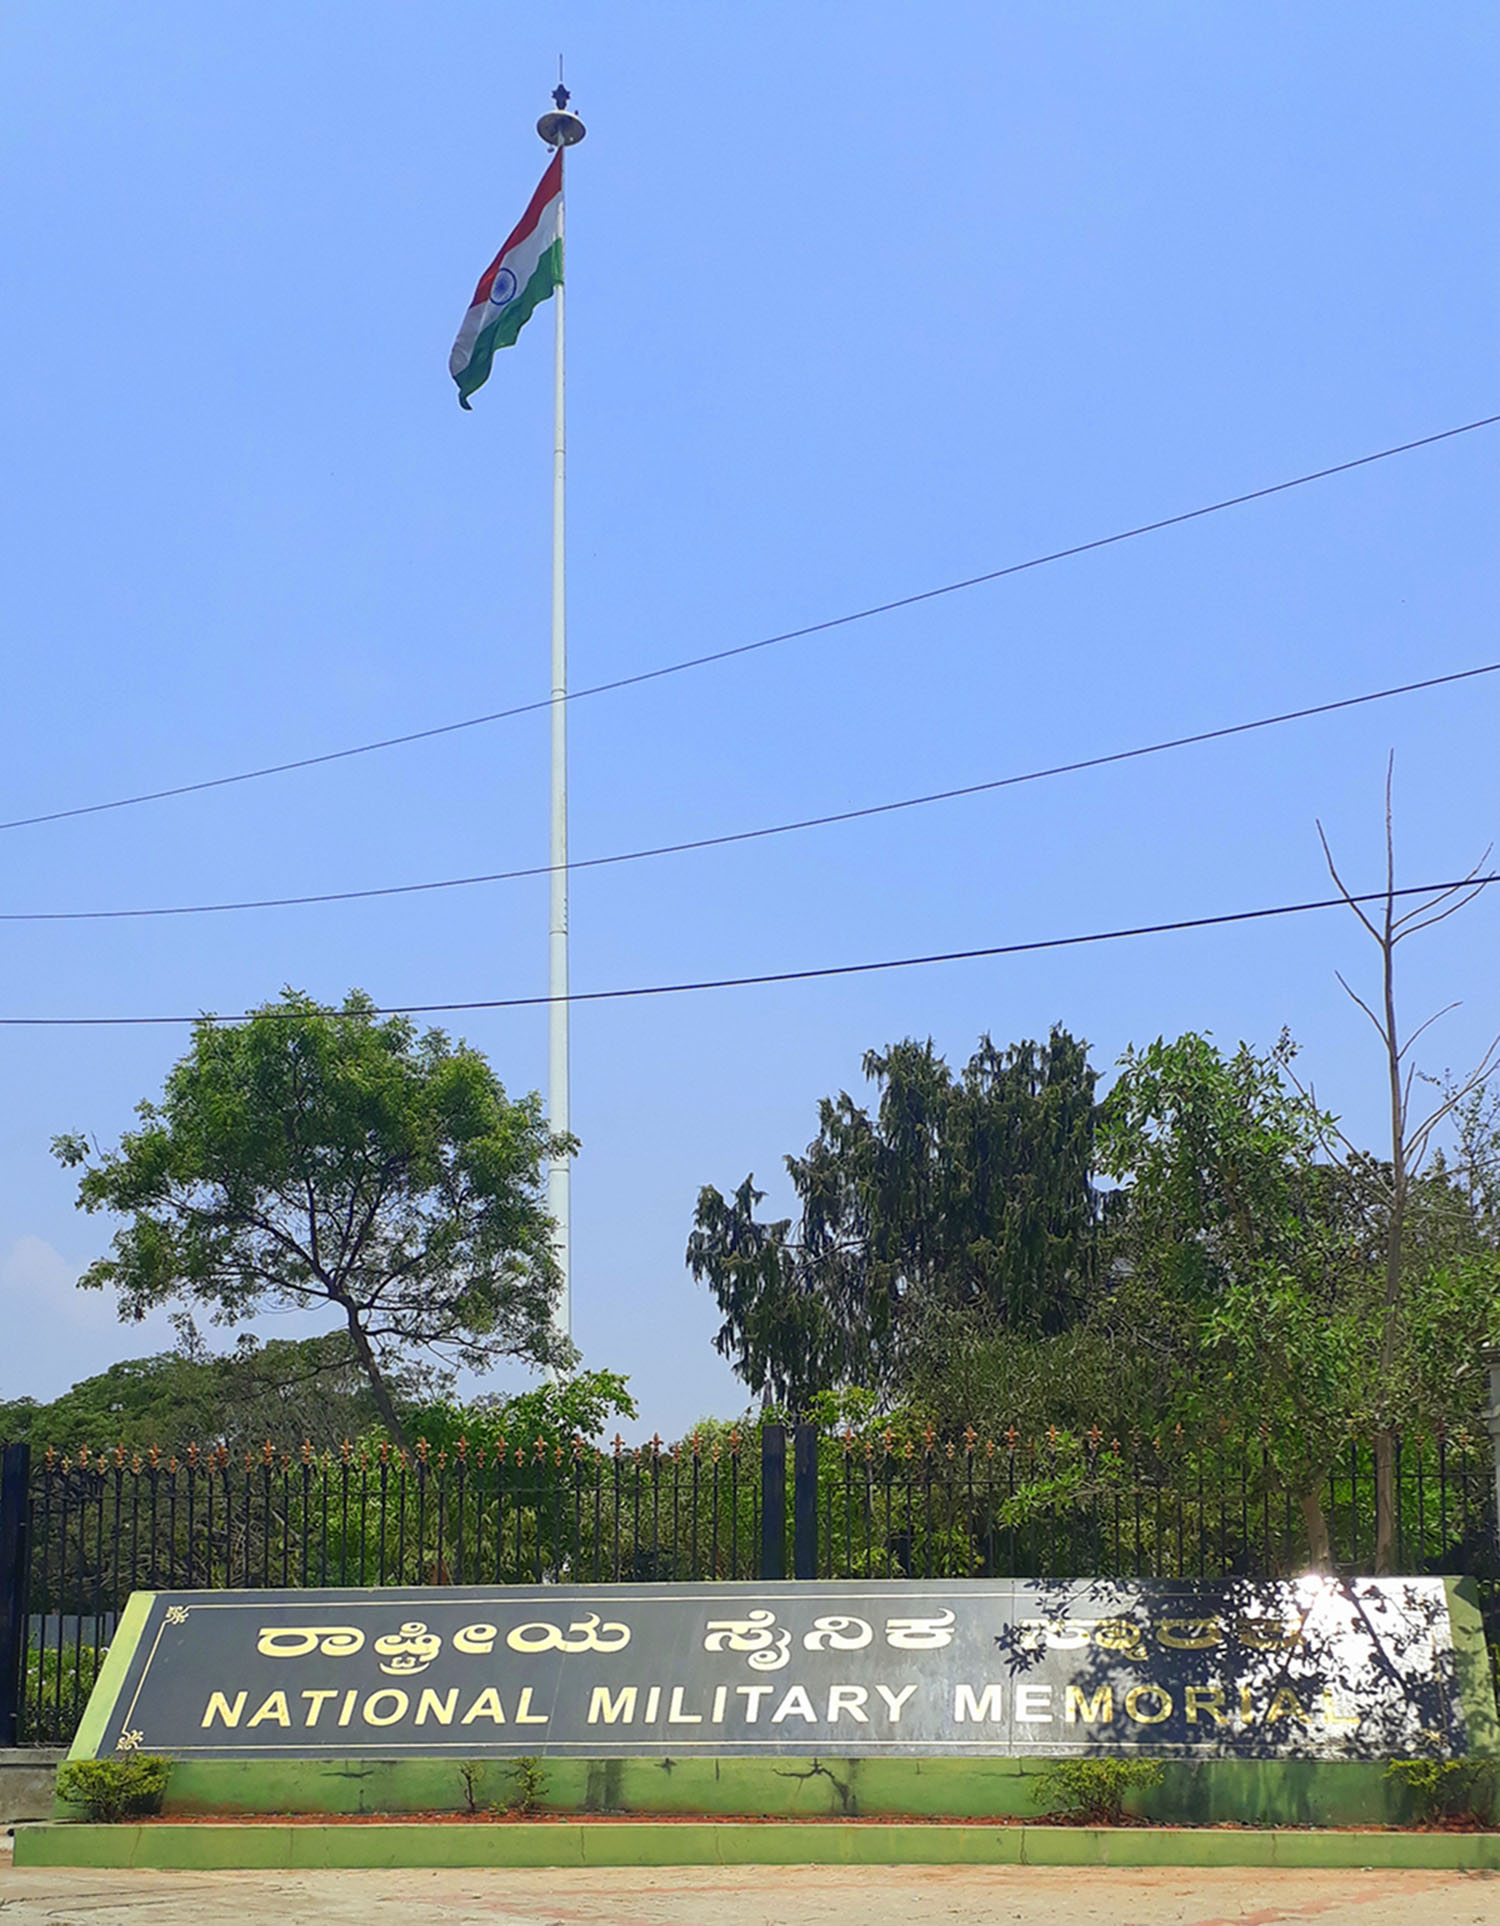 The granite entrance plank with the Indian flag in the background